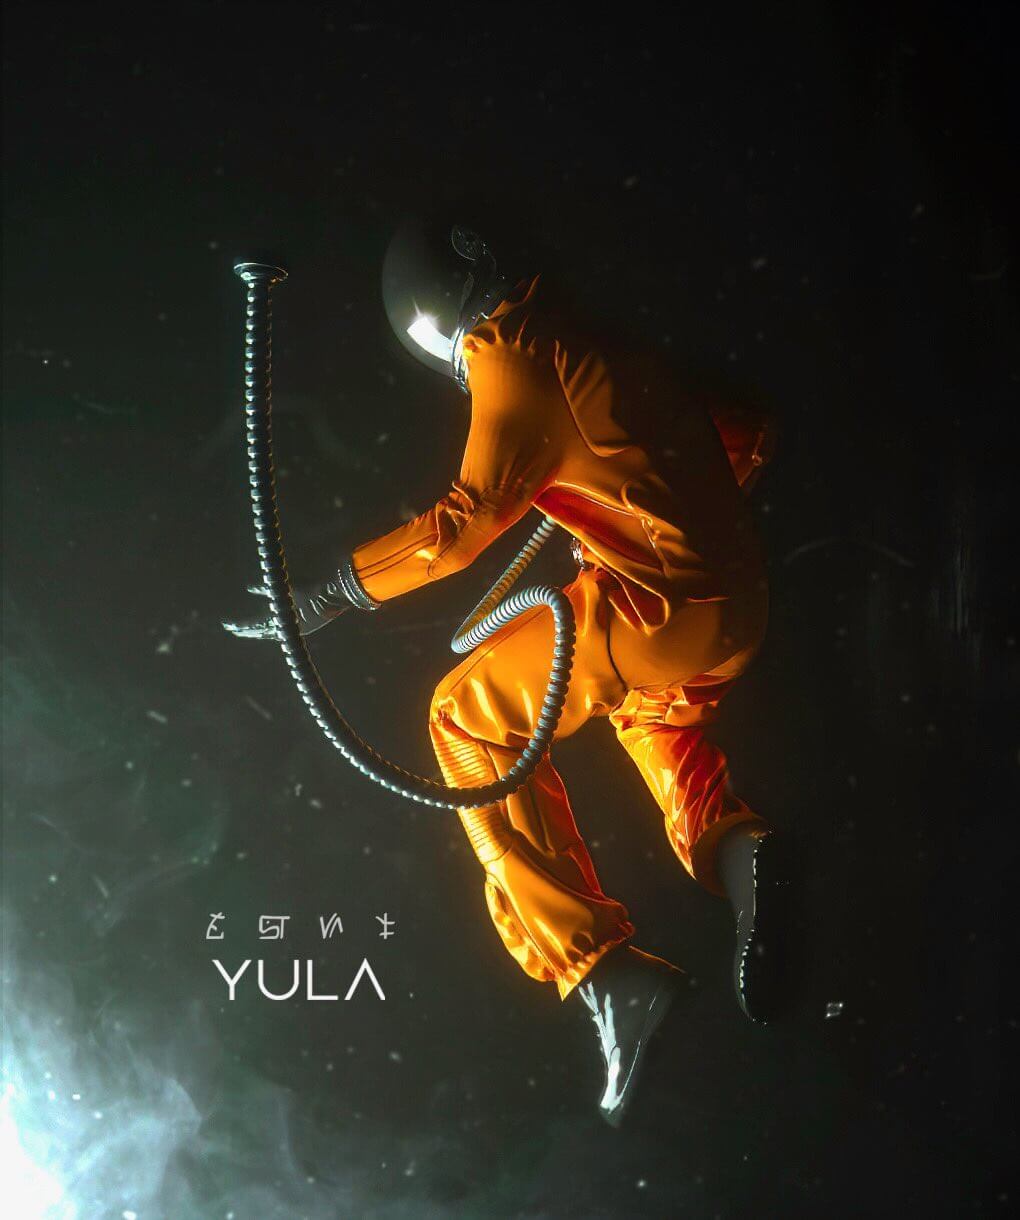 Sit Back, Relax, and Get “Lost” with YULA